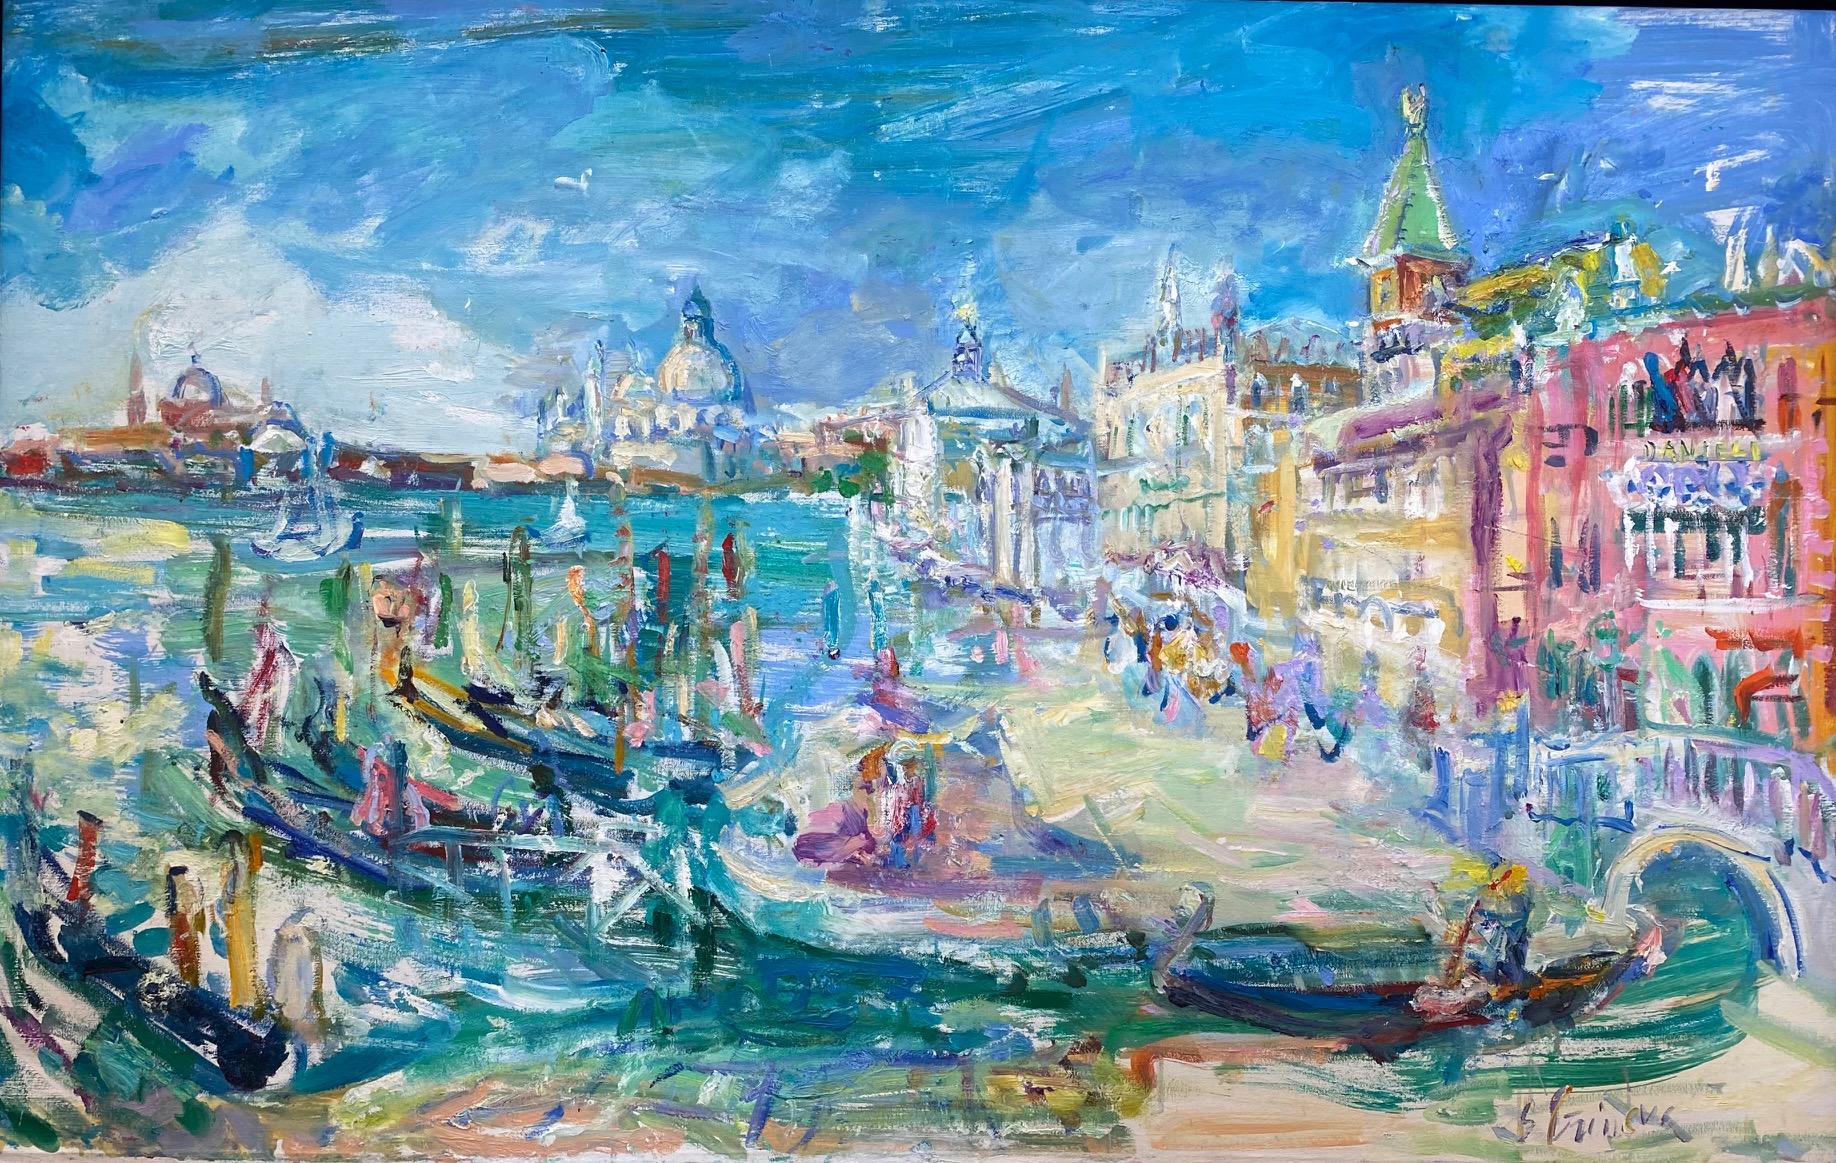 Venice, original 30x47 abstract expressionist marine landscape - Painting by Sonia Grineva